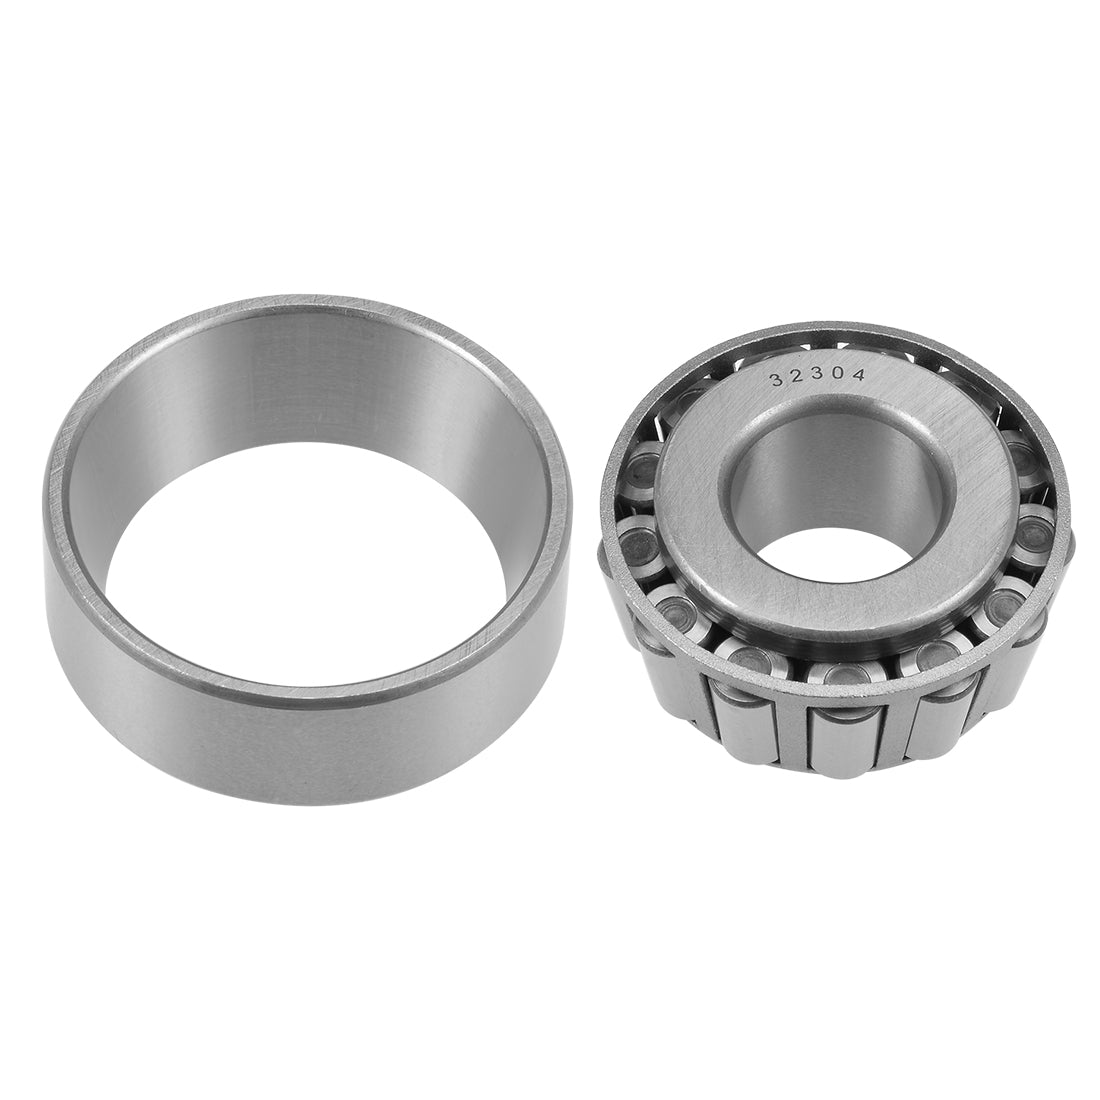 uxcell Uxcell 32304 Tapered Roller Bearing Cone and Cup Set 20mm Bore 52mm O.D. 21mm Width